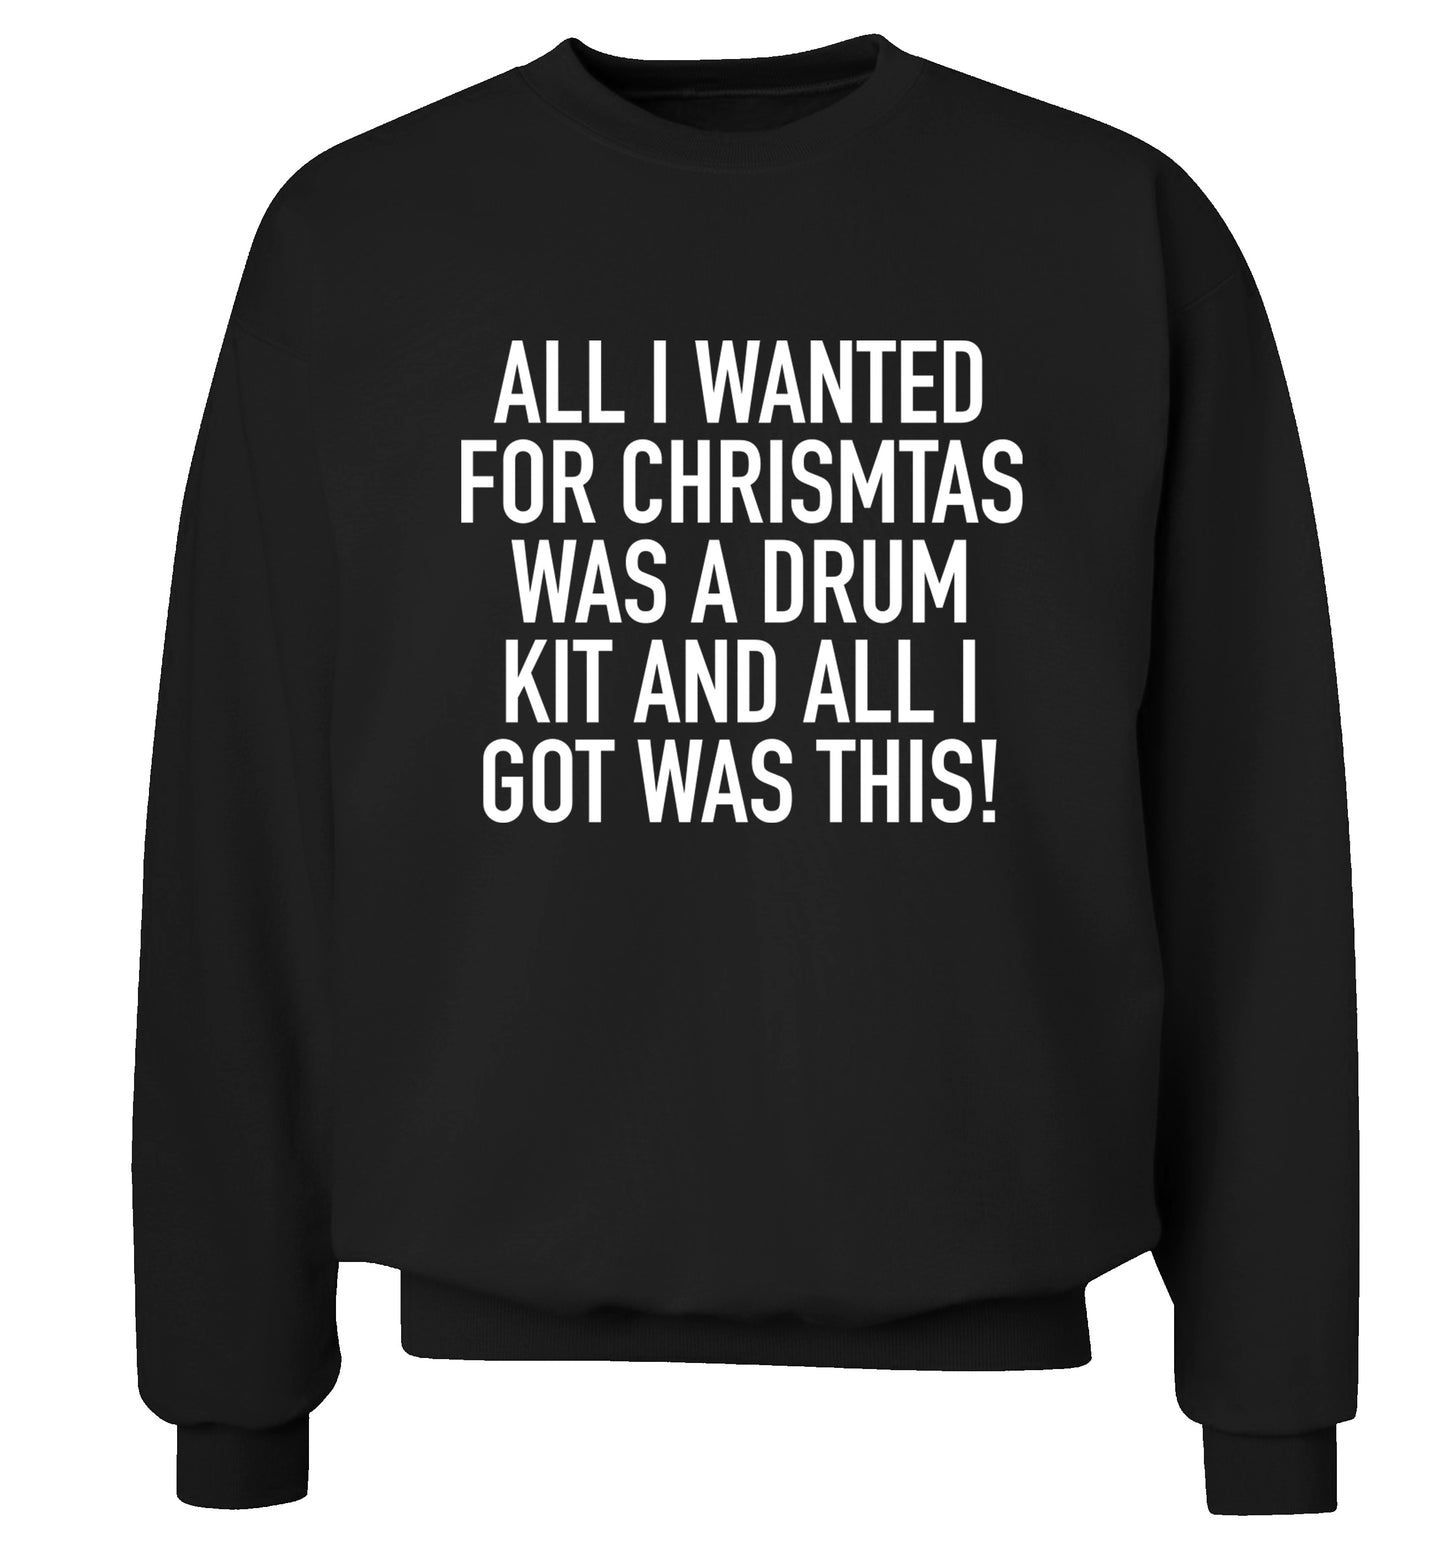 All I wanted for Christmas was a drum kit and all I got was this! Adult's unisex black Sweater 2XL